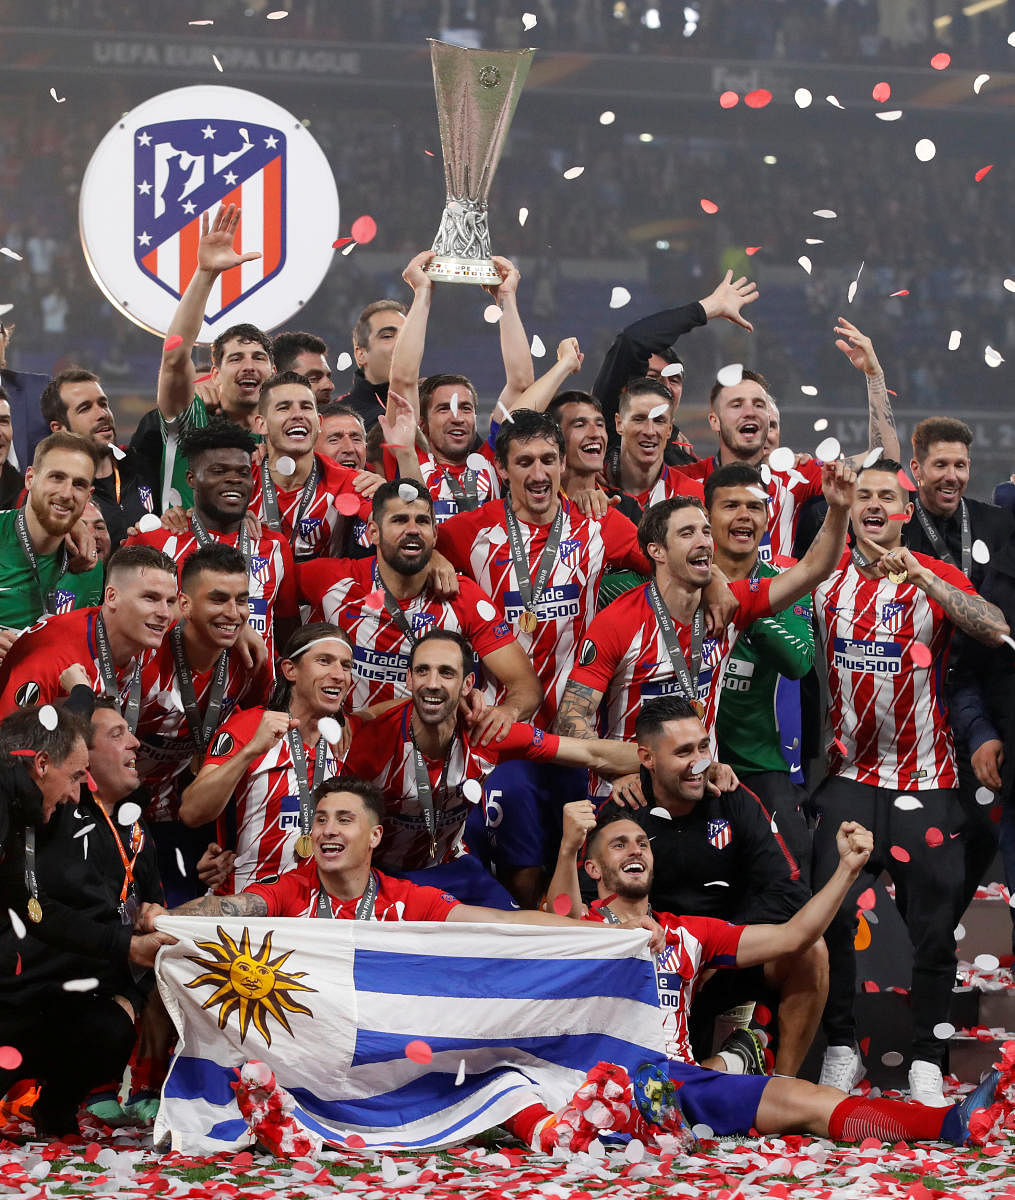 Champions: Atletico Madrid players celebrate with the Europa League trophy after beating Marseille 3-0 in the final. Reuters